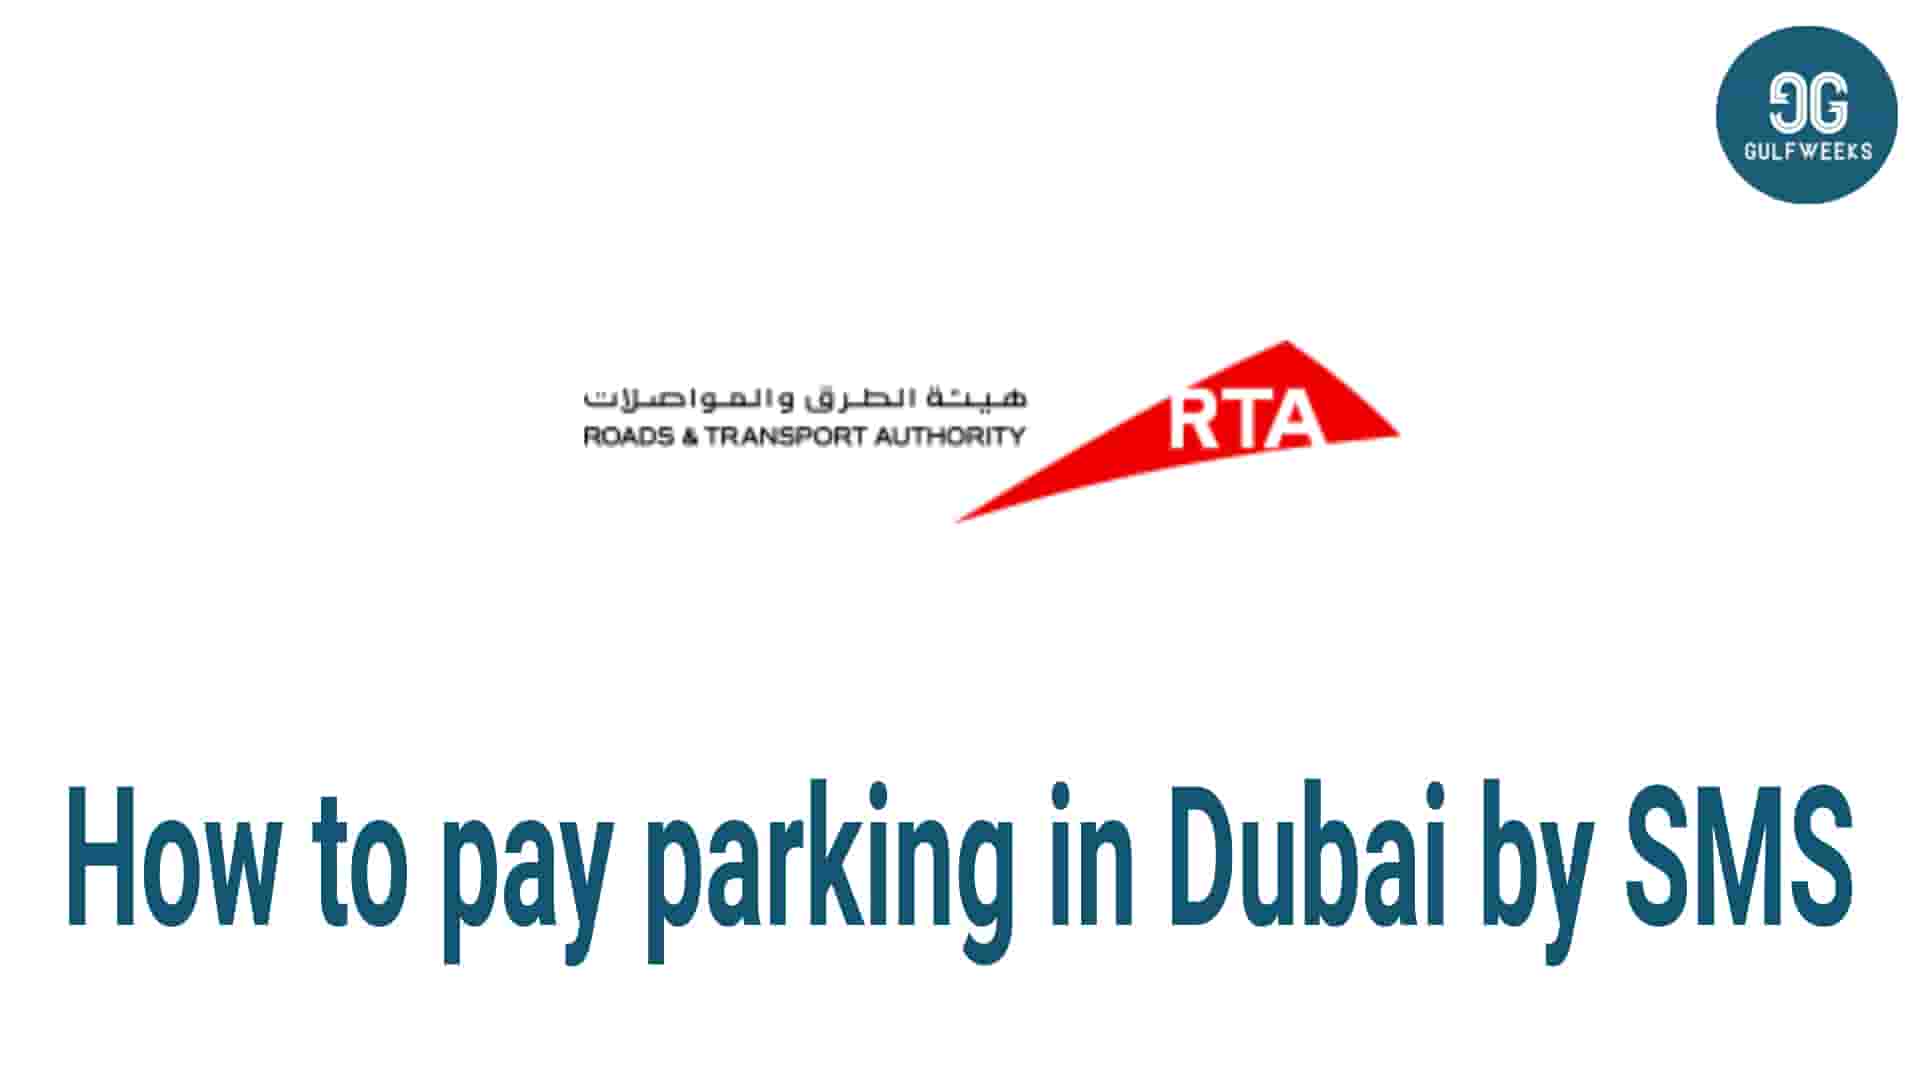 How to pay parking in Dubai by SMS